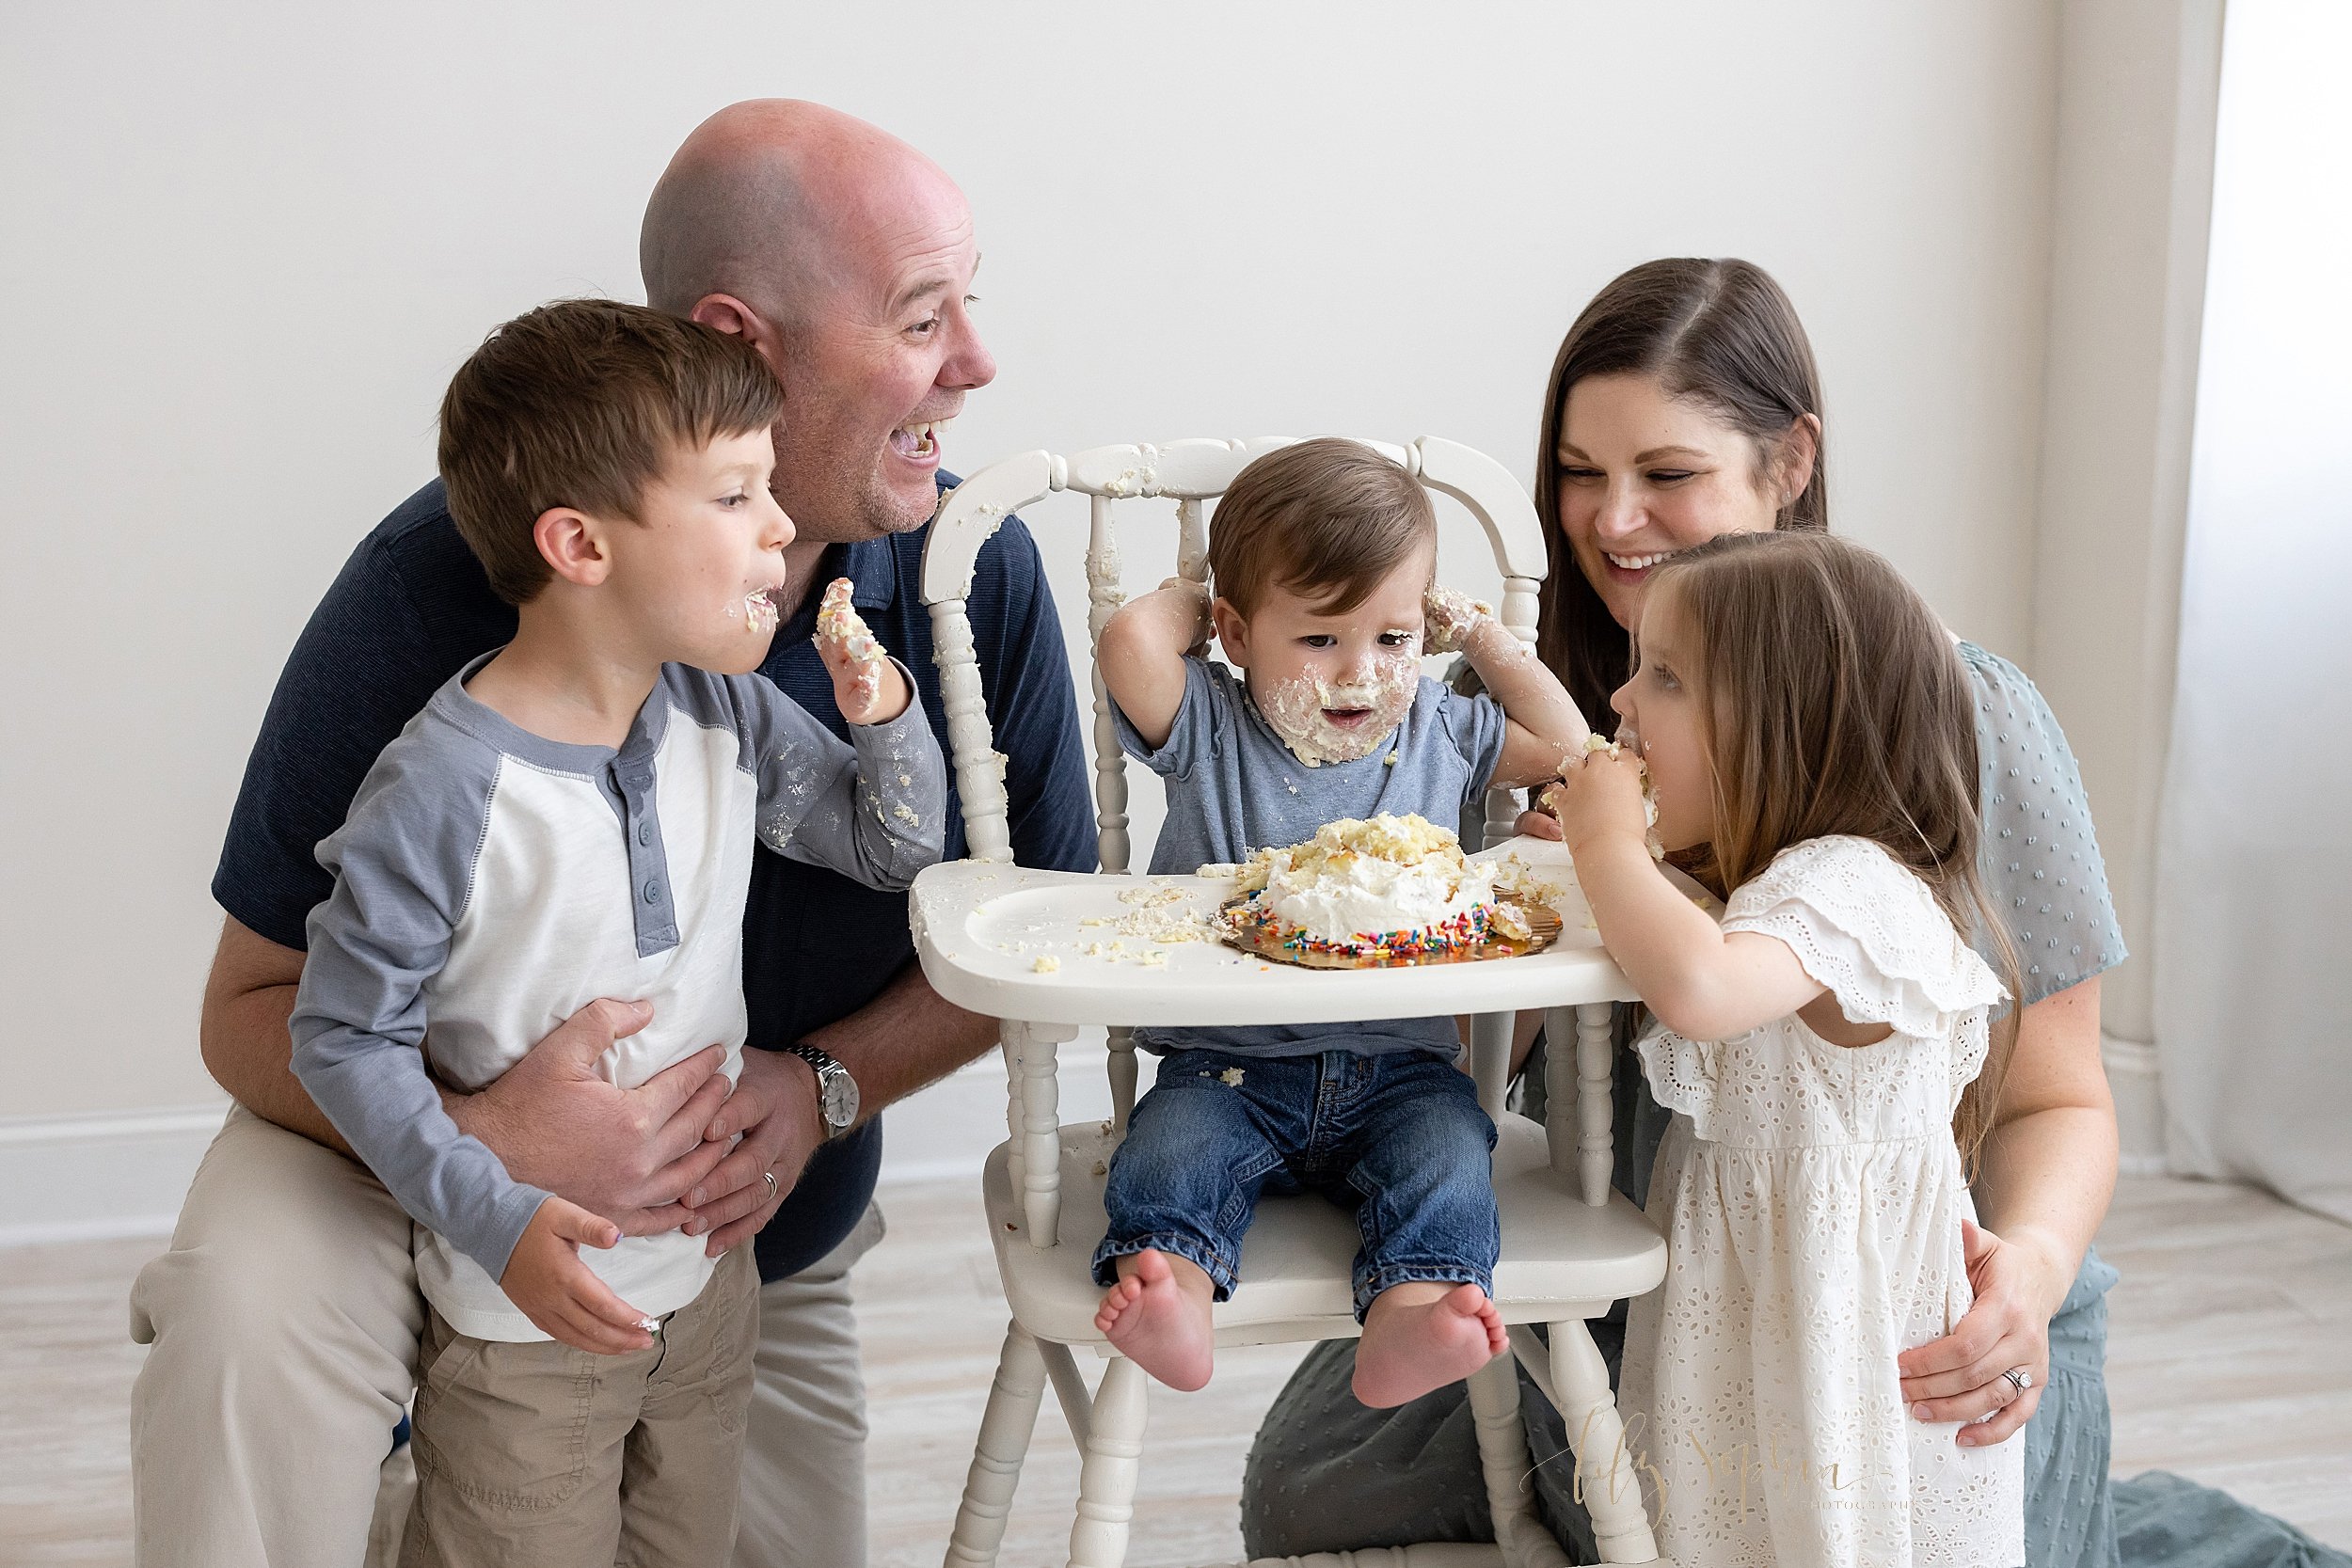  Fun family picture of a family of a one year old celebrating his first birthday with a smash cake as the birthday boy and his sibling devour it with mom and day watching taken in front of a window streaming natural light in a photography studio near